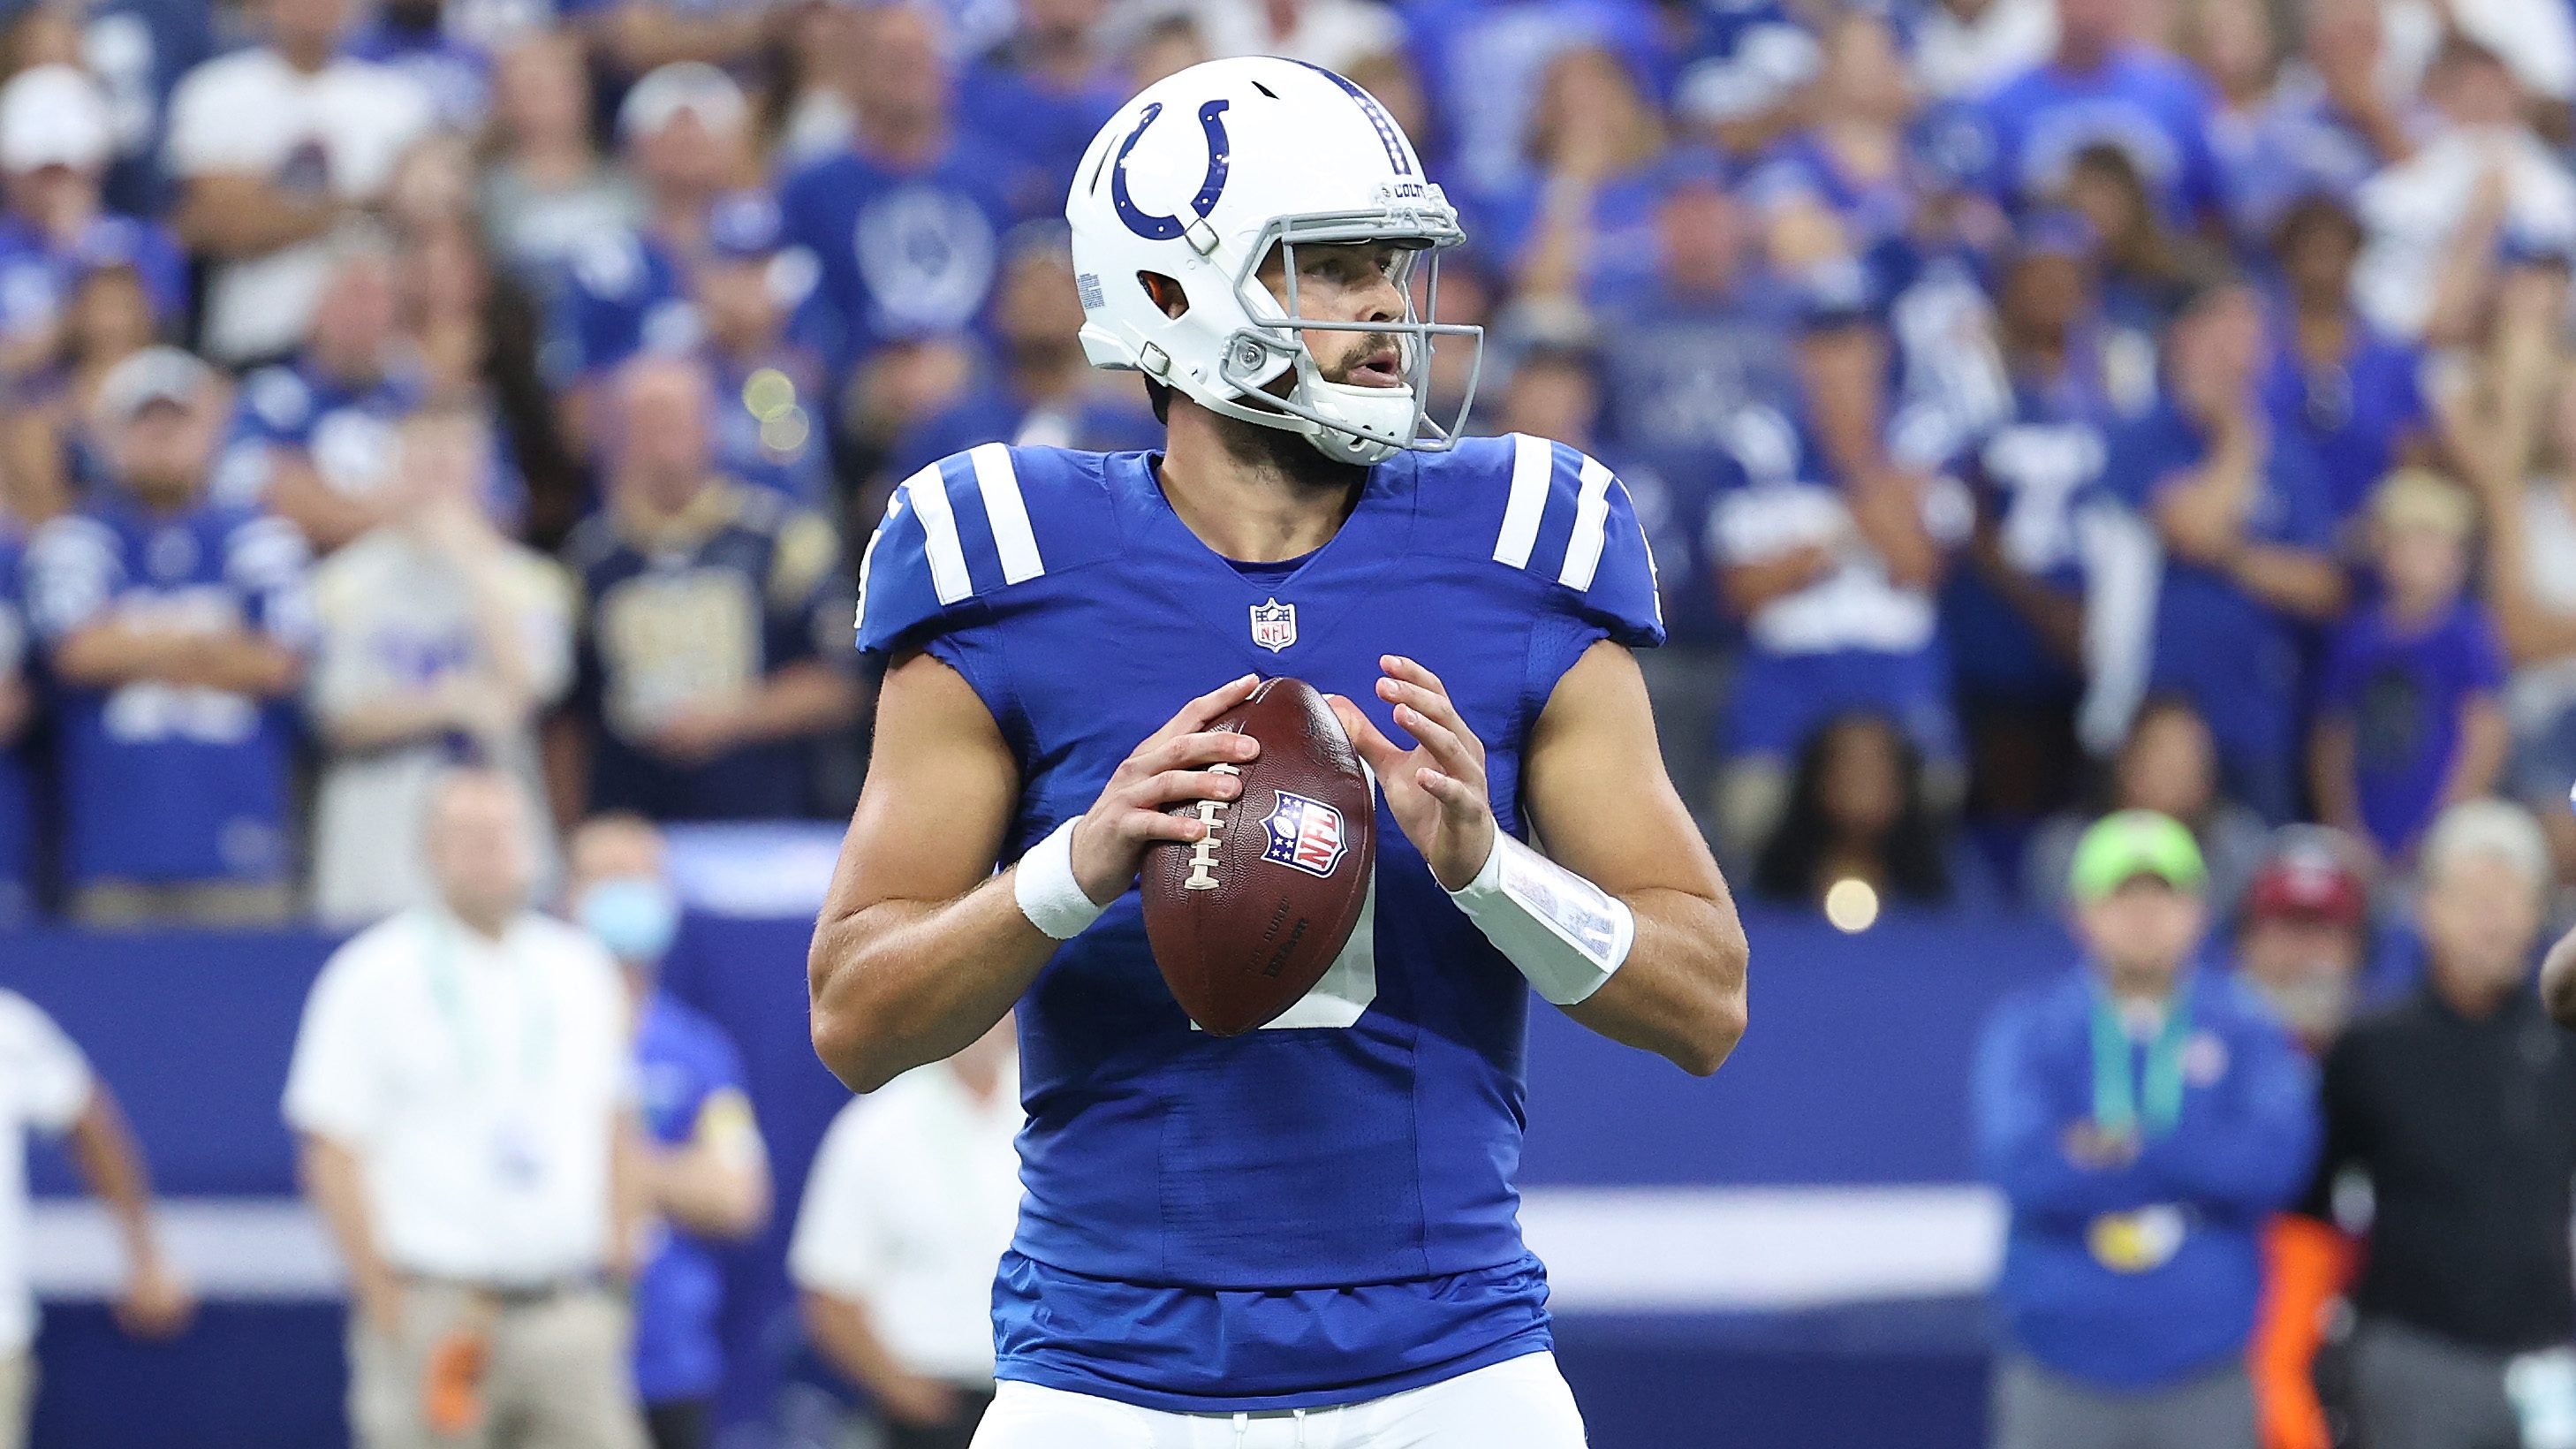 Jets Could Bolster Backup QB With Colts' Cut: Jacob Eason